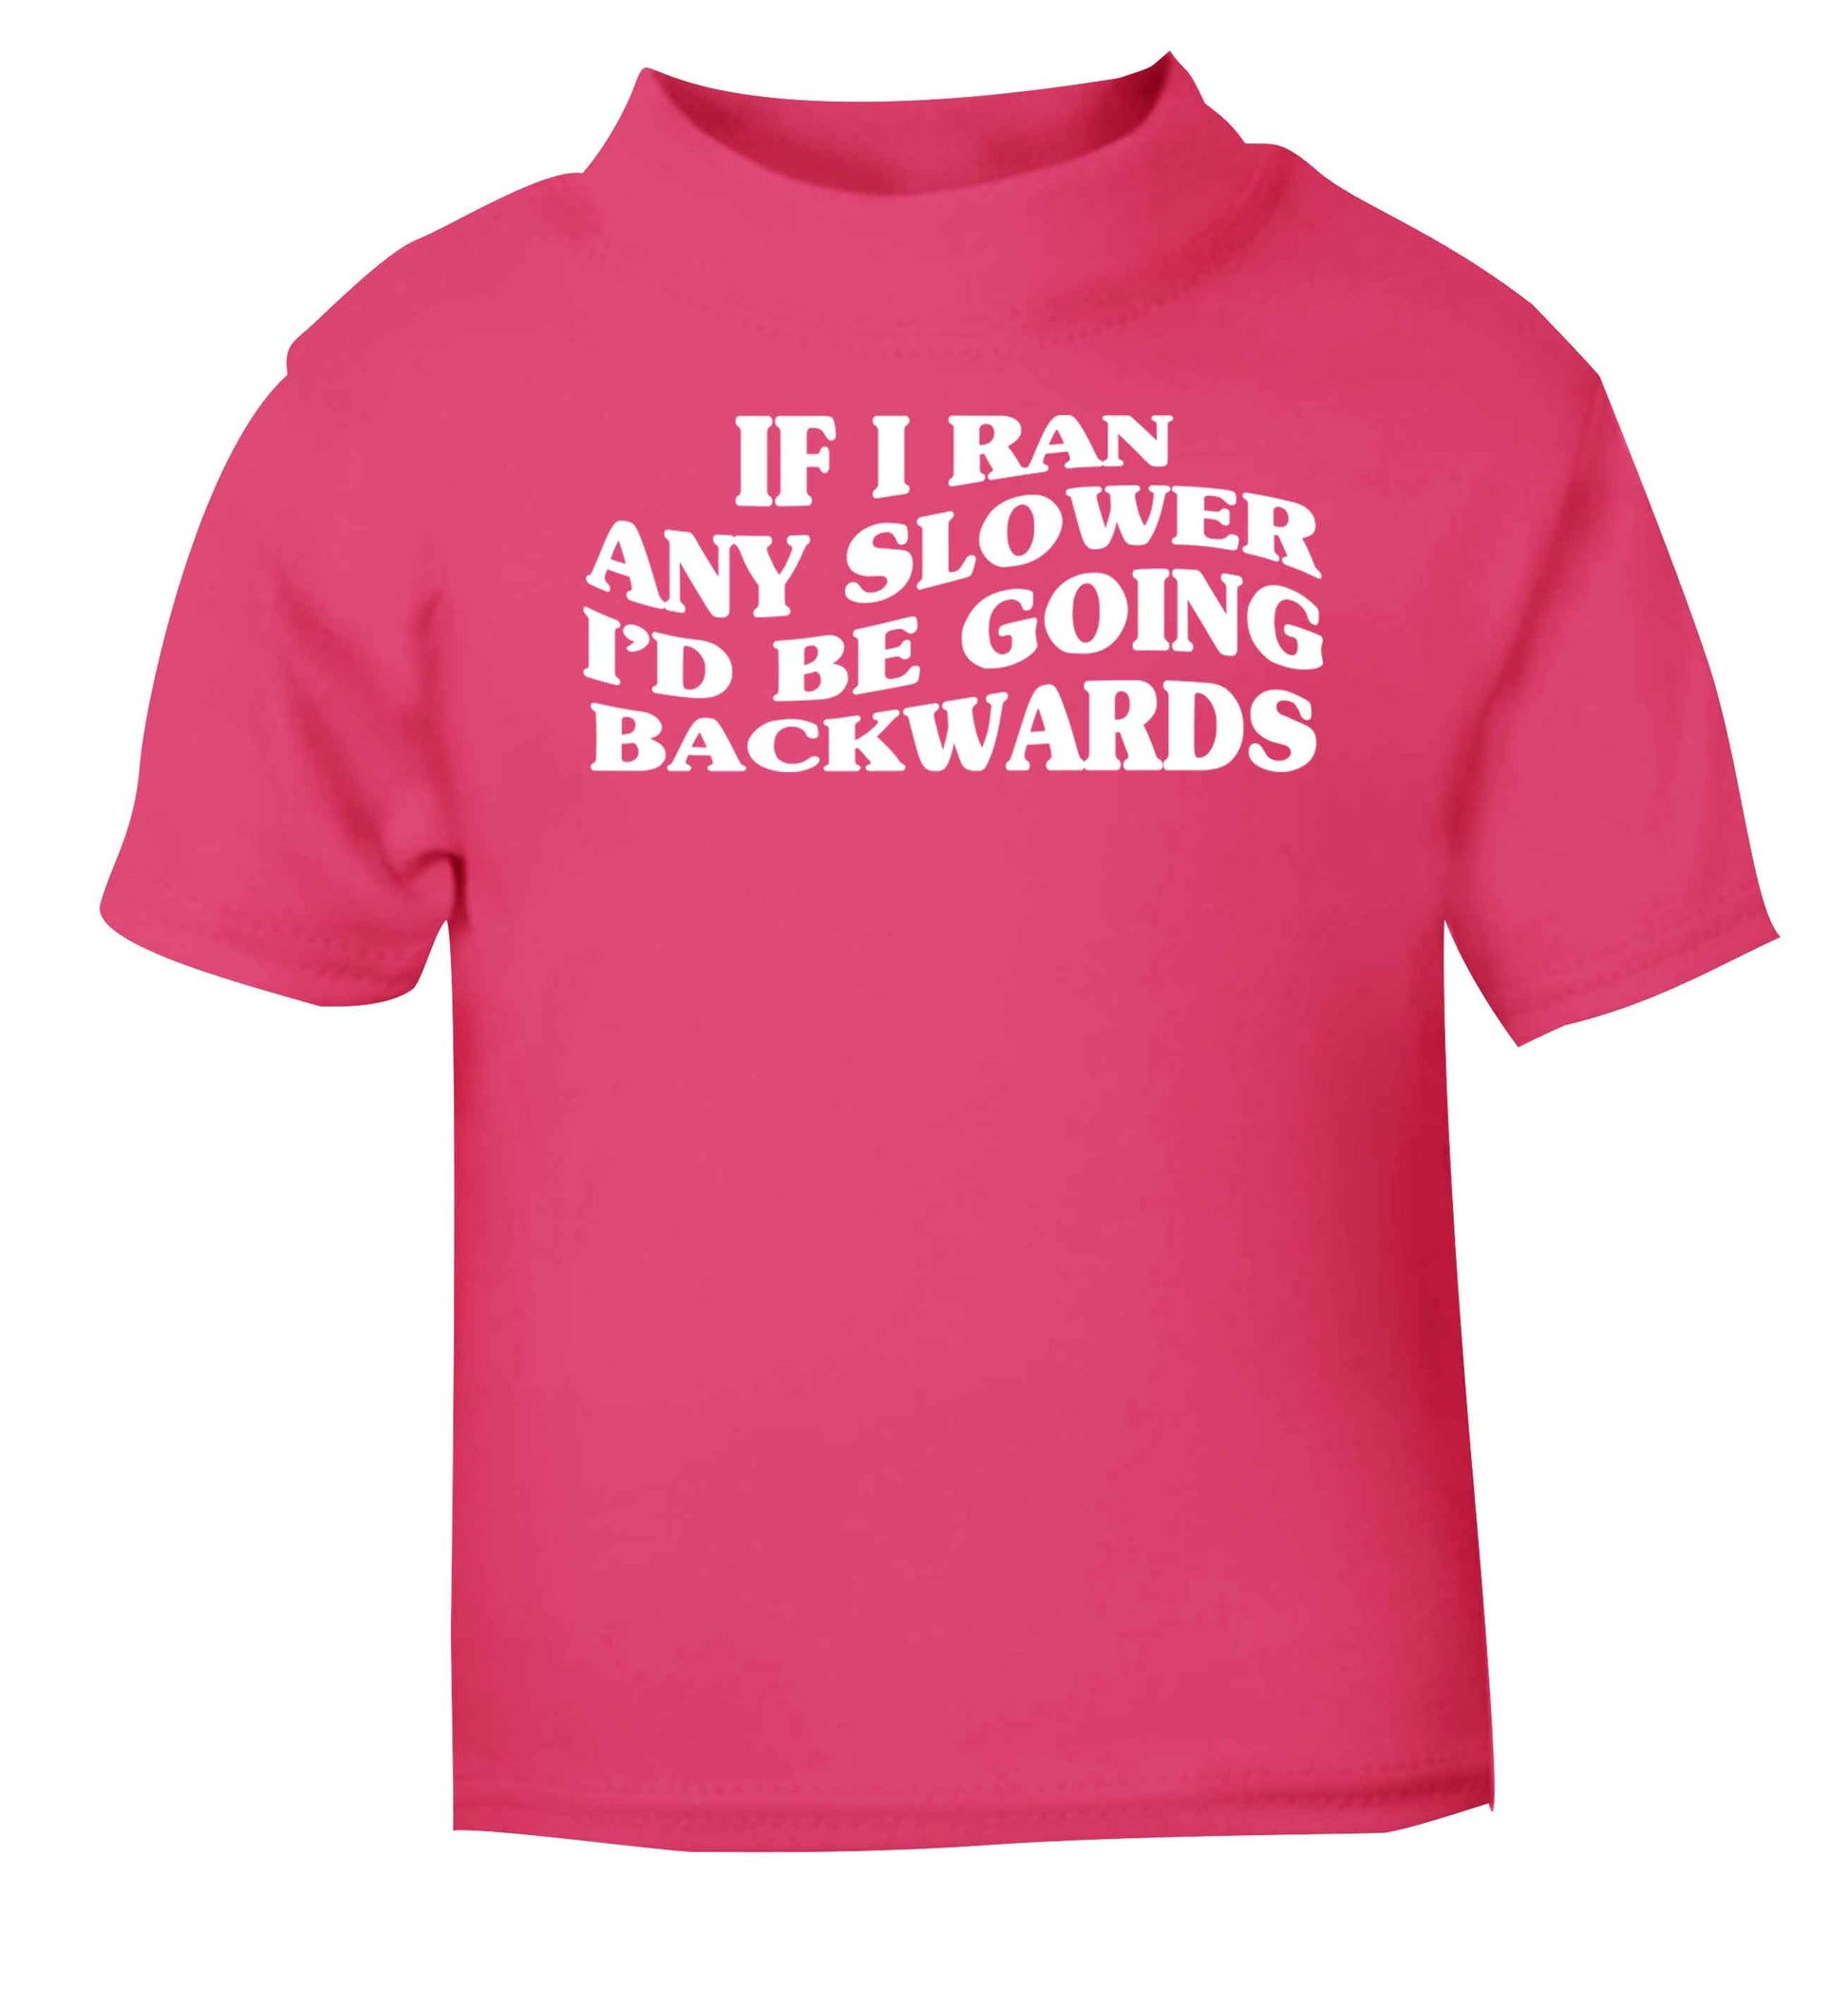 If I ran any slower I'd be going backwards pink baby toddler Tshirt 2 Years